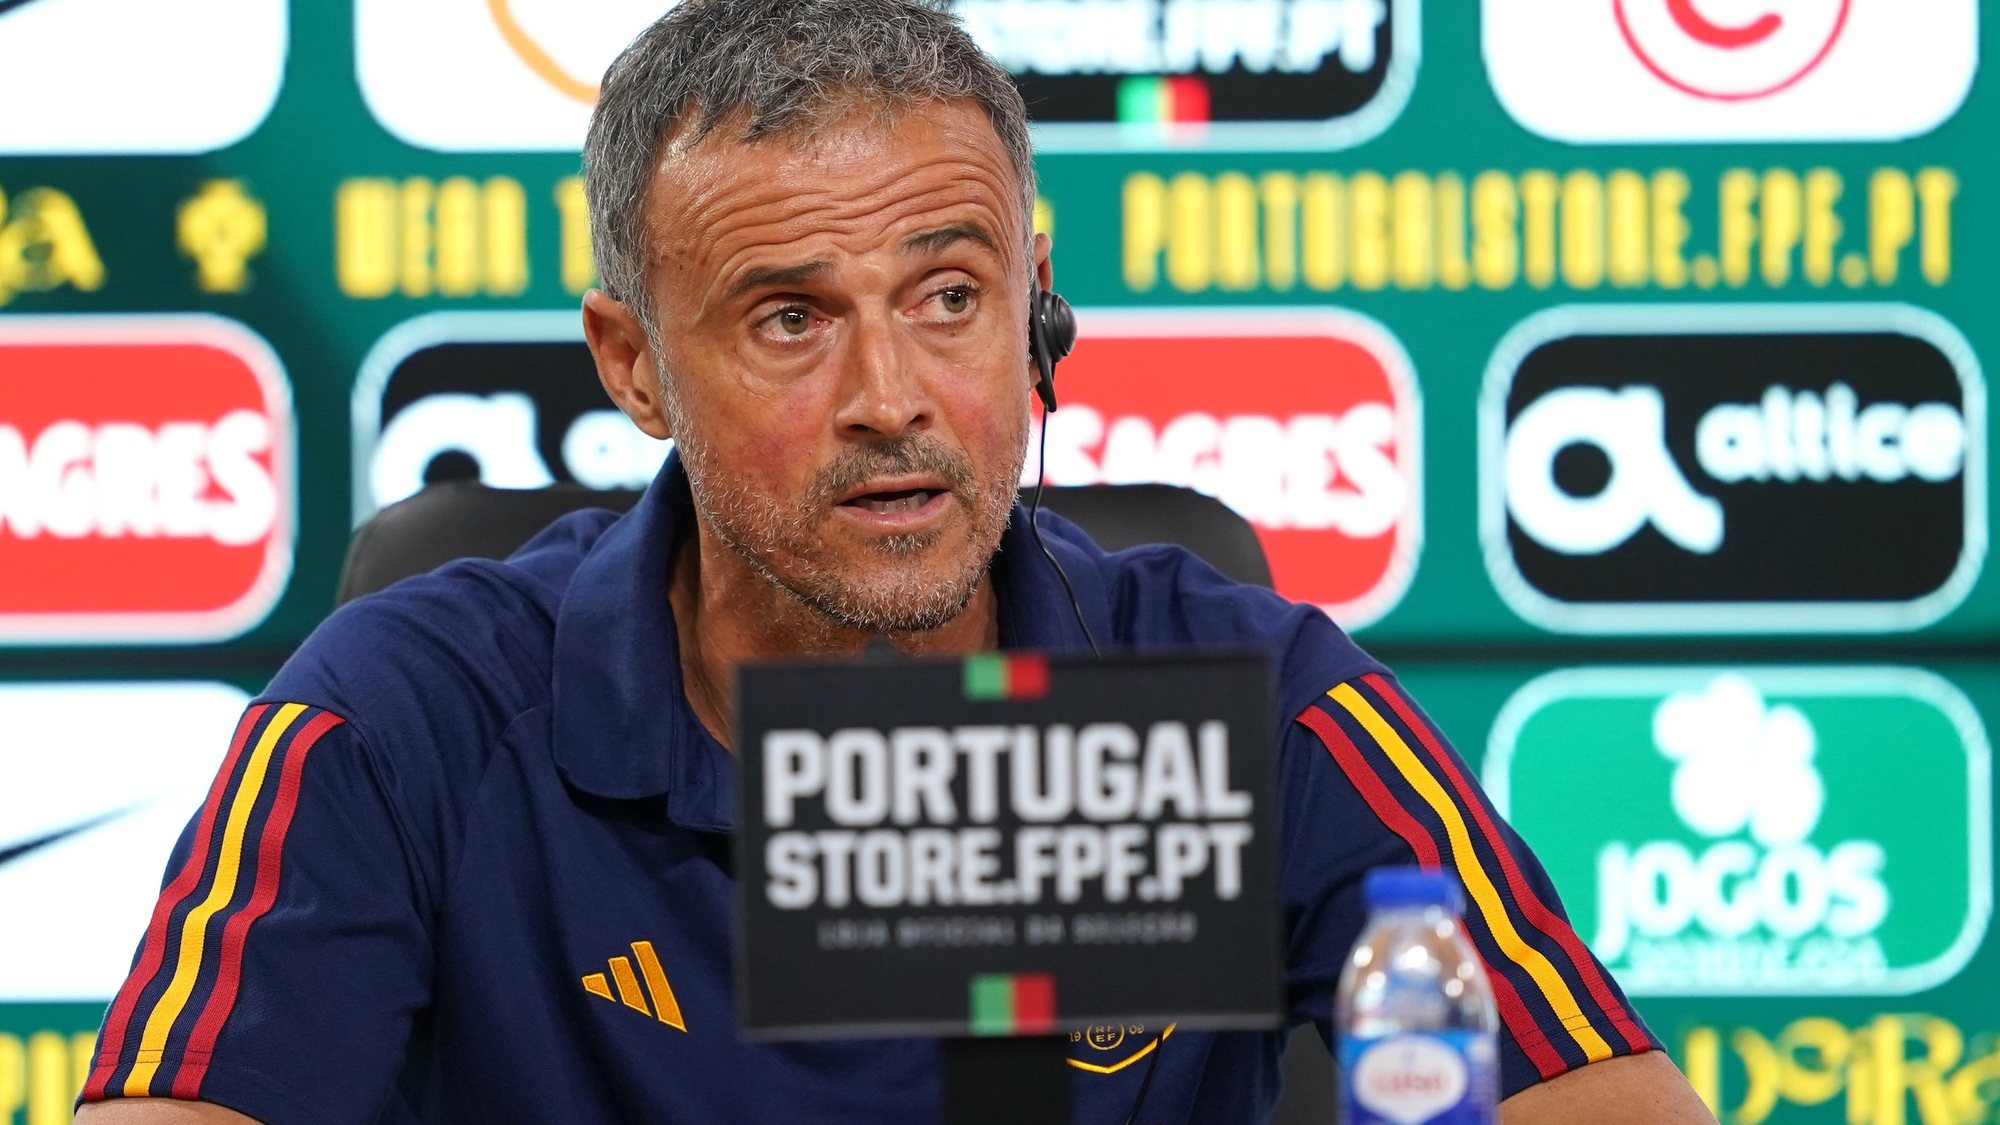 Spain head coach Luis Enrique attends a press conference in Braga, Portugal, 26 September 2022. Spain will face Portugal in their UEFA Nations League soccer match on 27 September 2022. HUGO DELGADO/LUSA